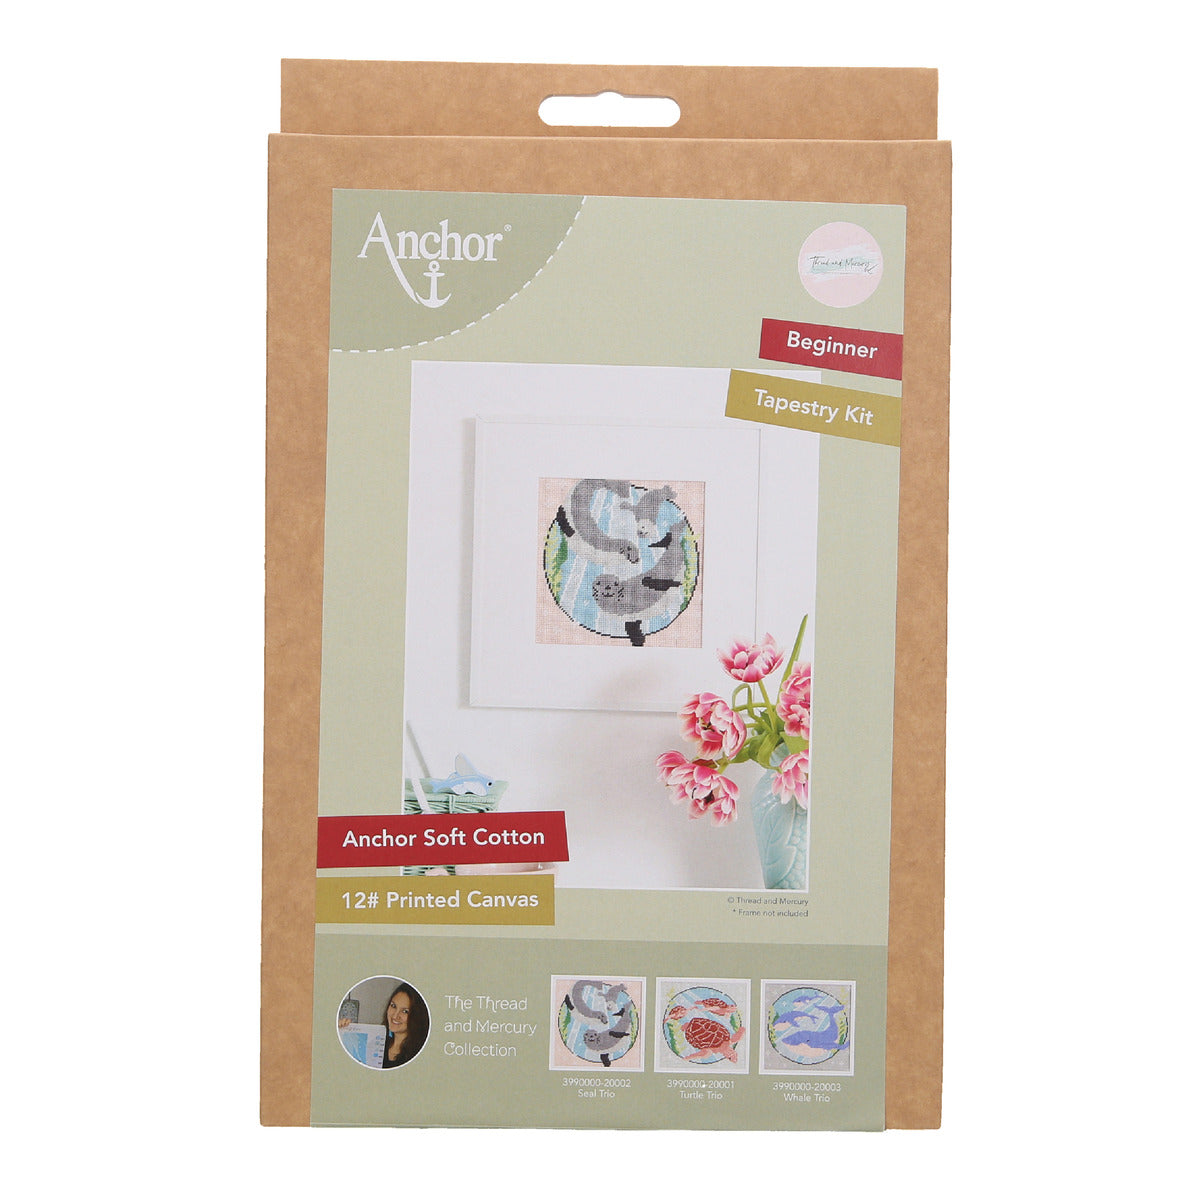 An image of the anchor beginner needlepoint kit in a box.